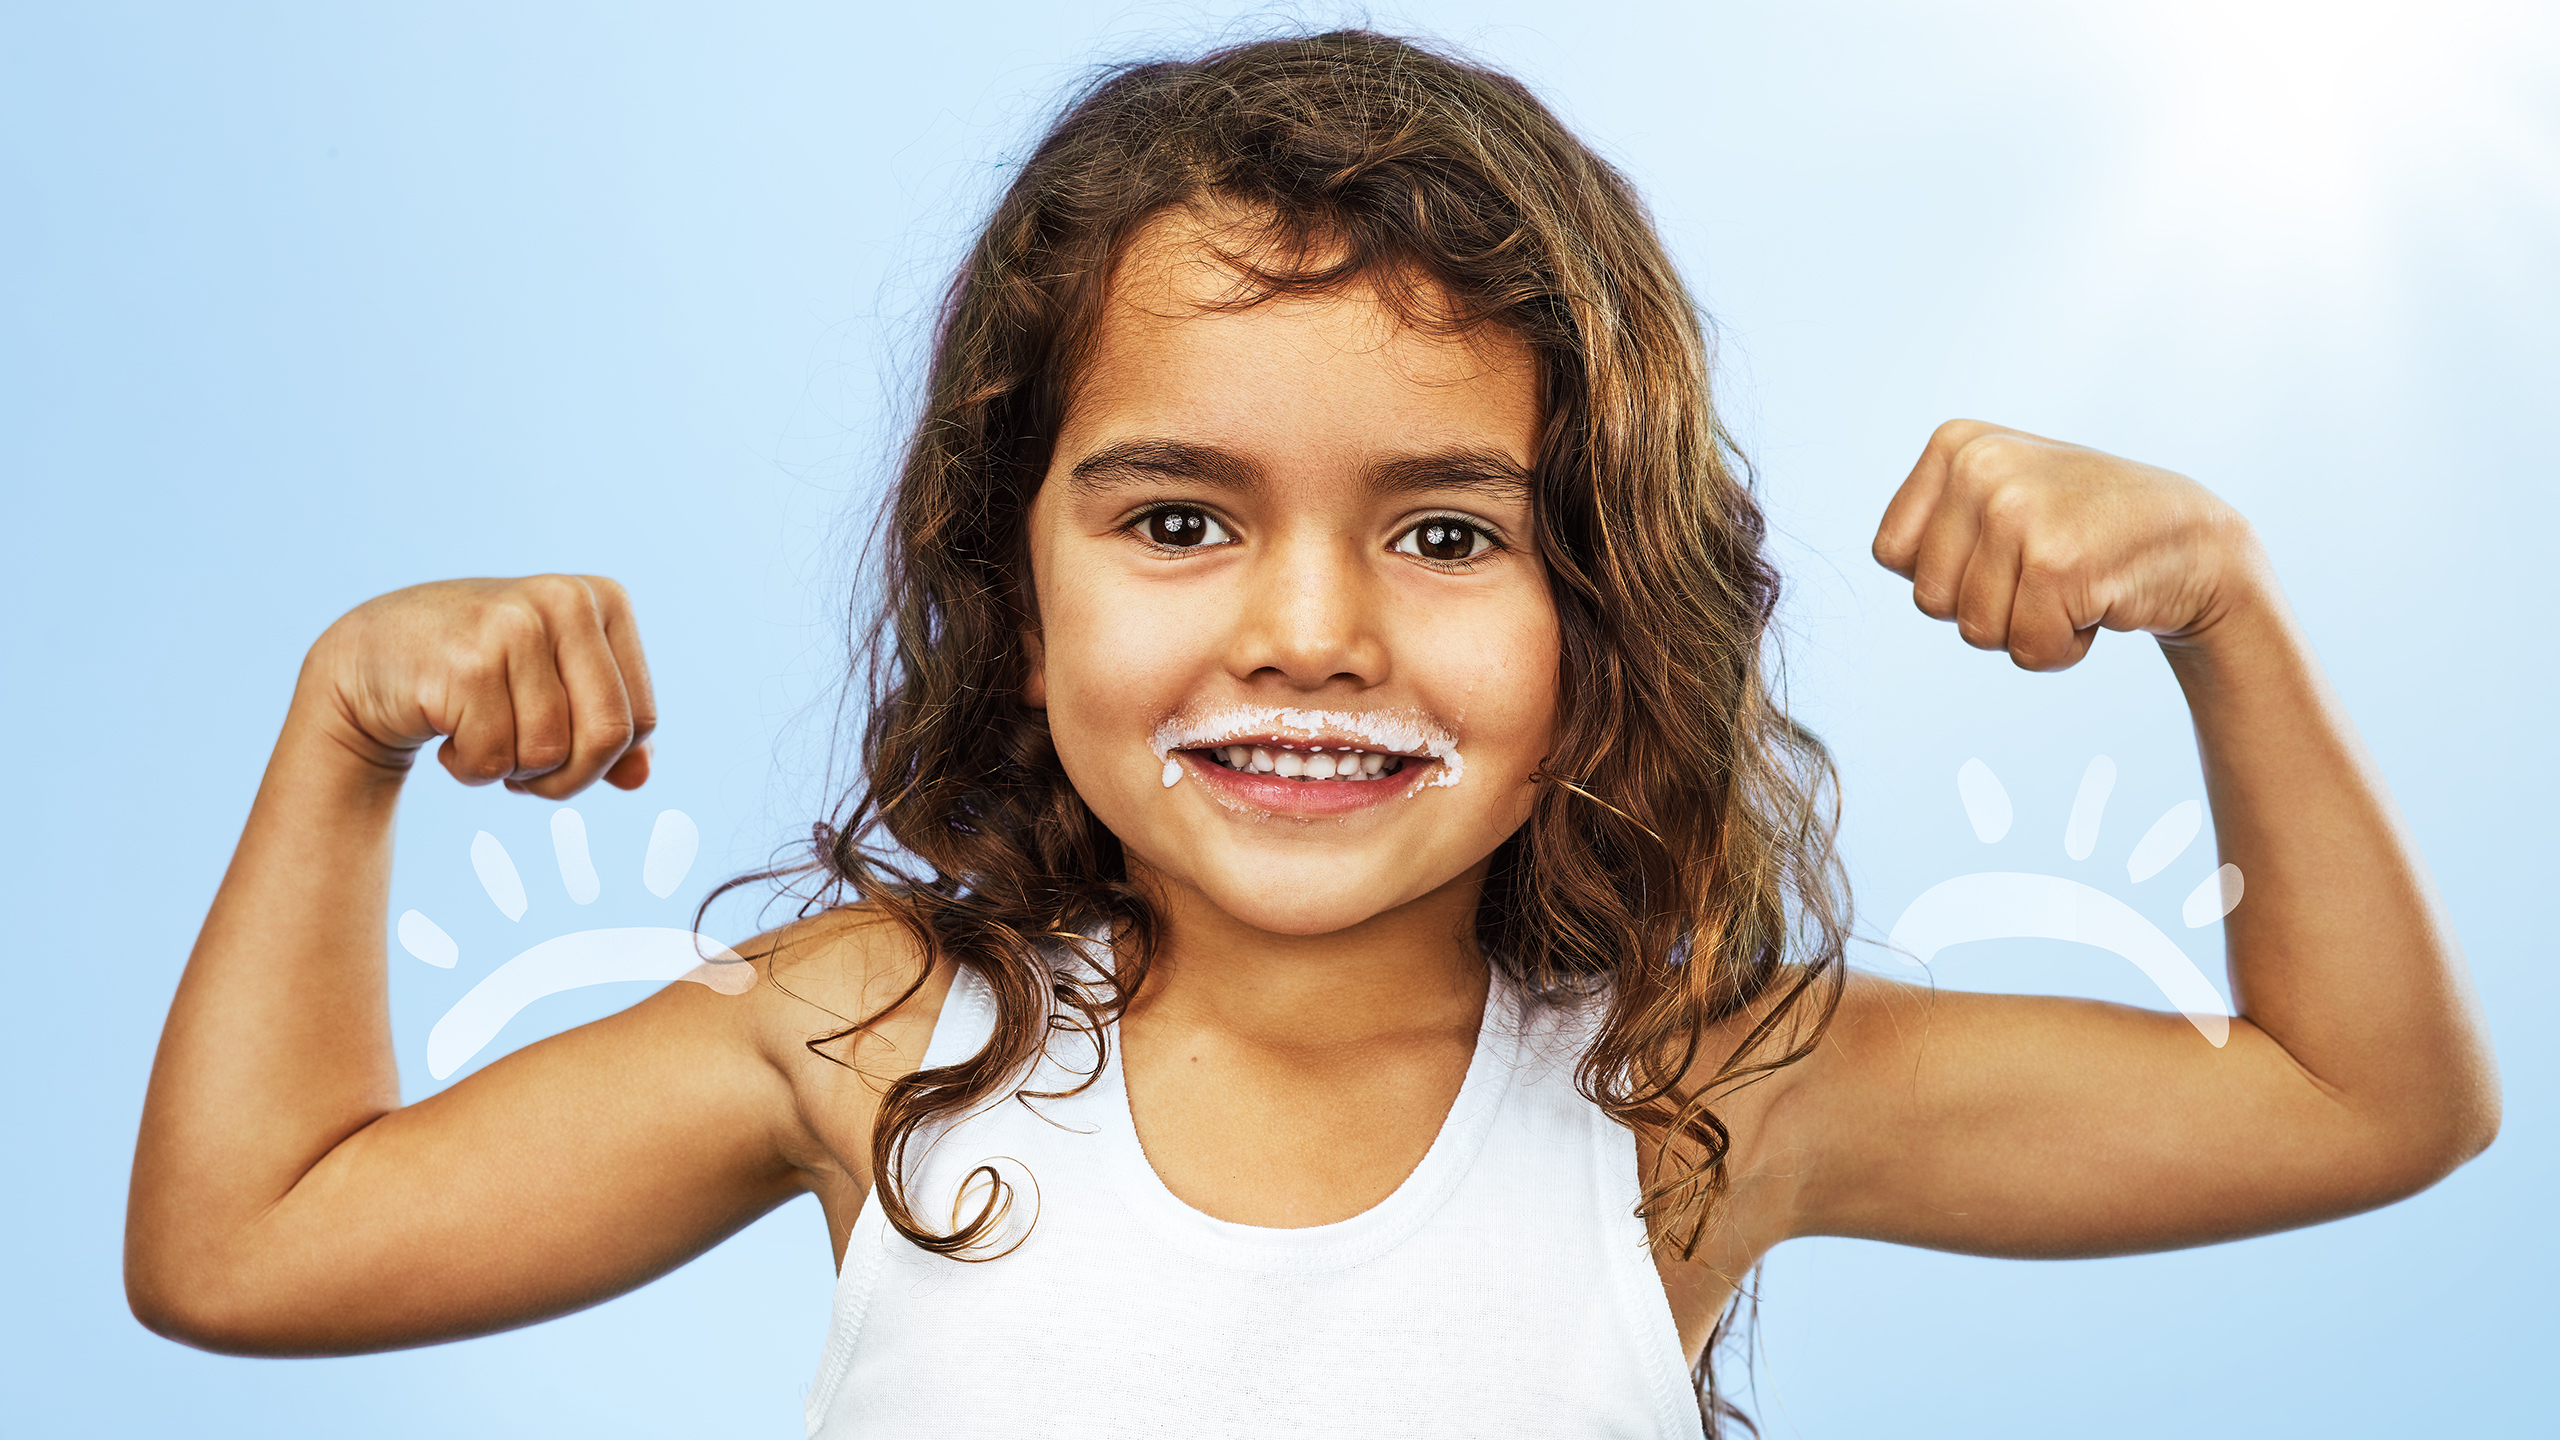 happy young girl with milk moustache and illustrated muscles